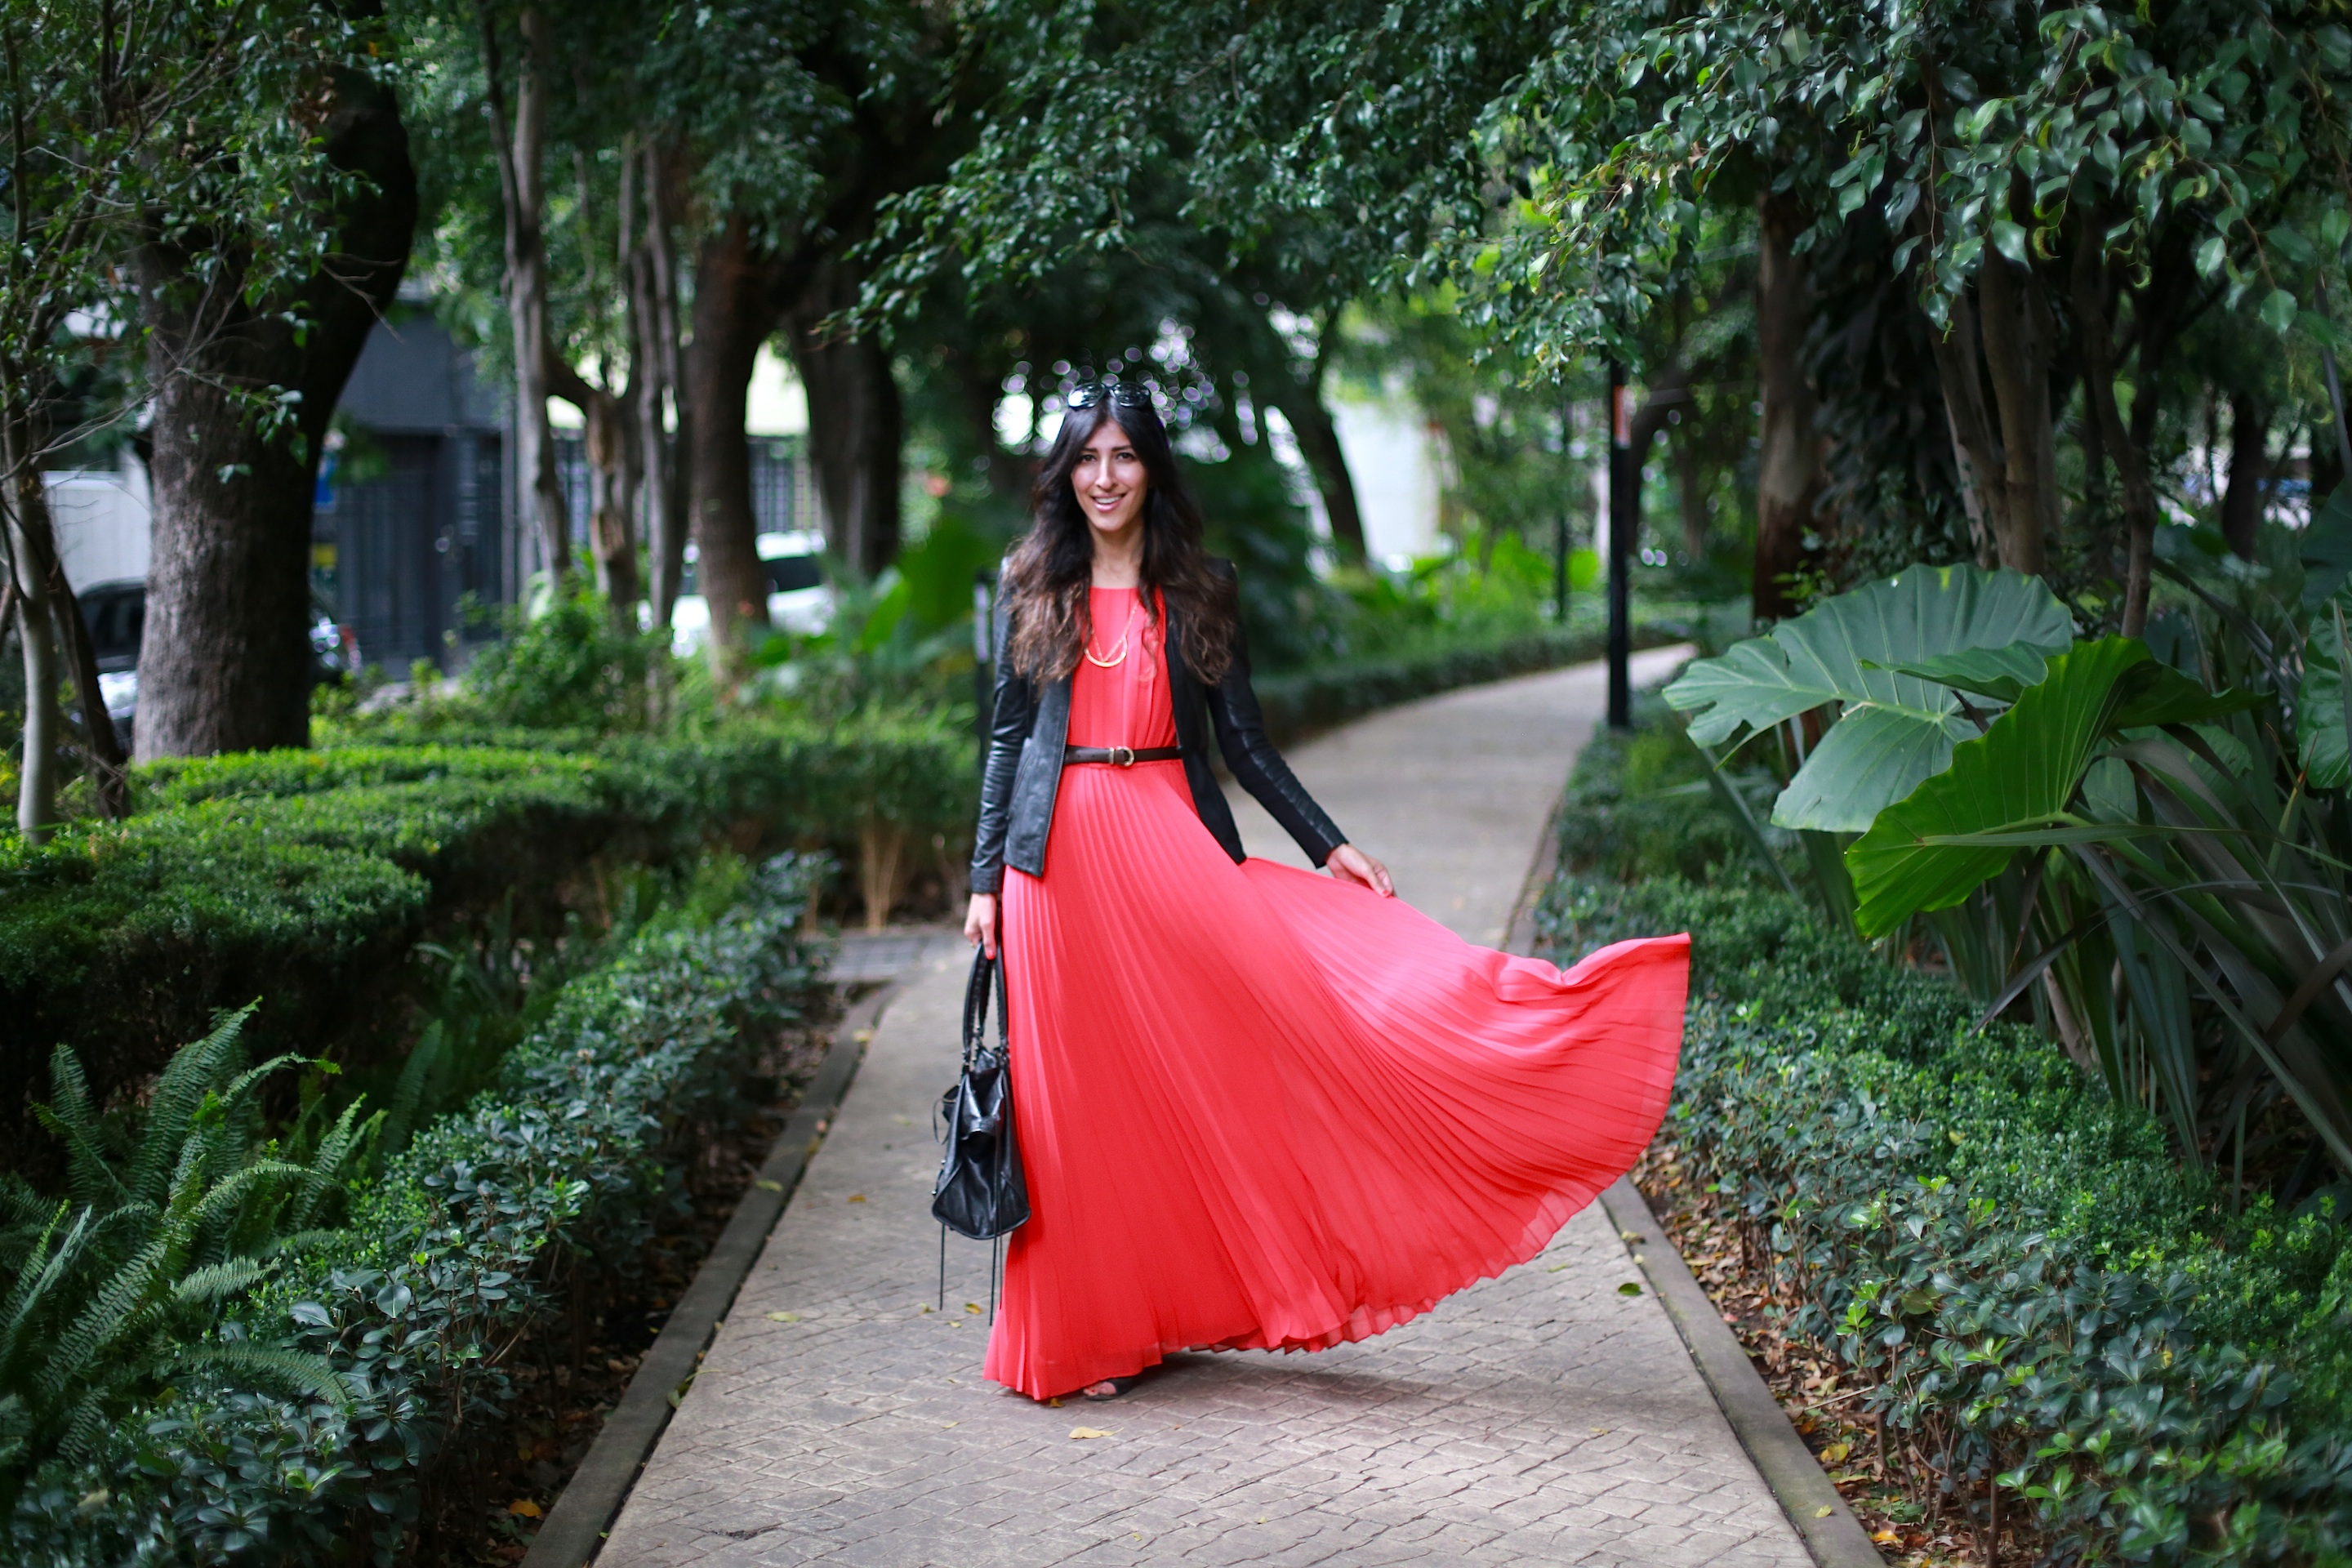 Maxi skirts or dresses with full skirts are my favorite pieces to partner with this jacket!